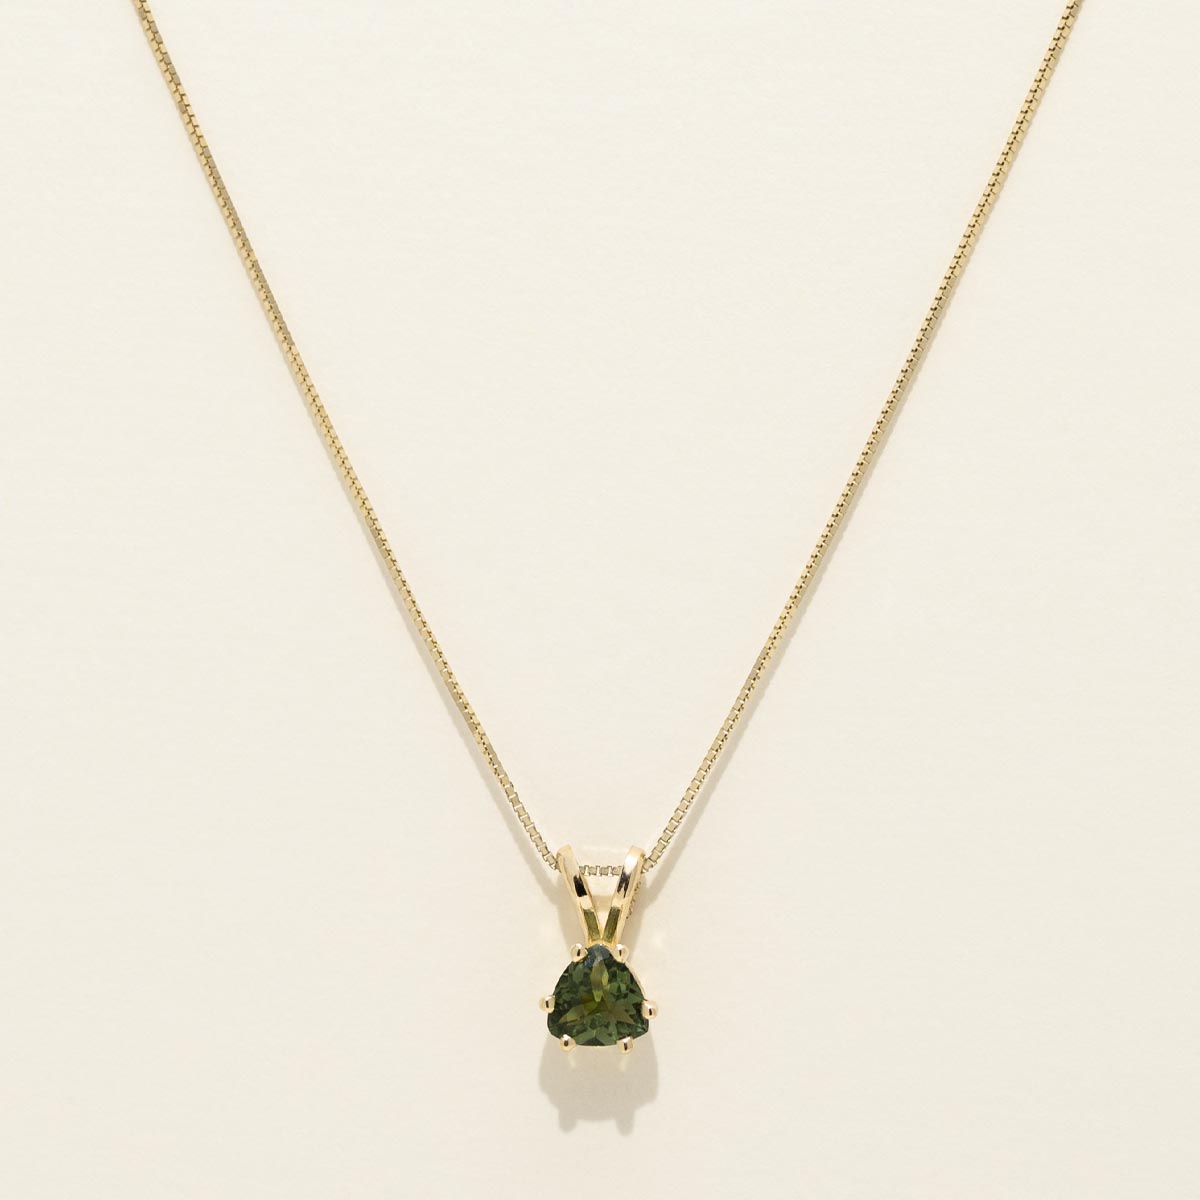 Maine Green Tourmaline Necklace in 14kt Yellow Gold